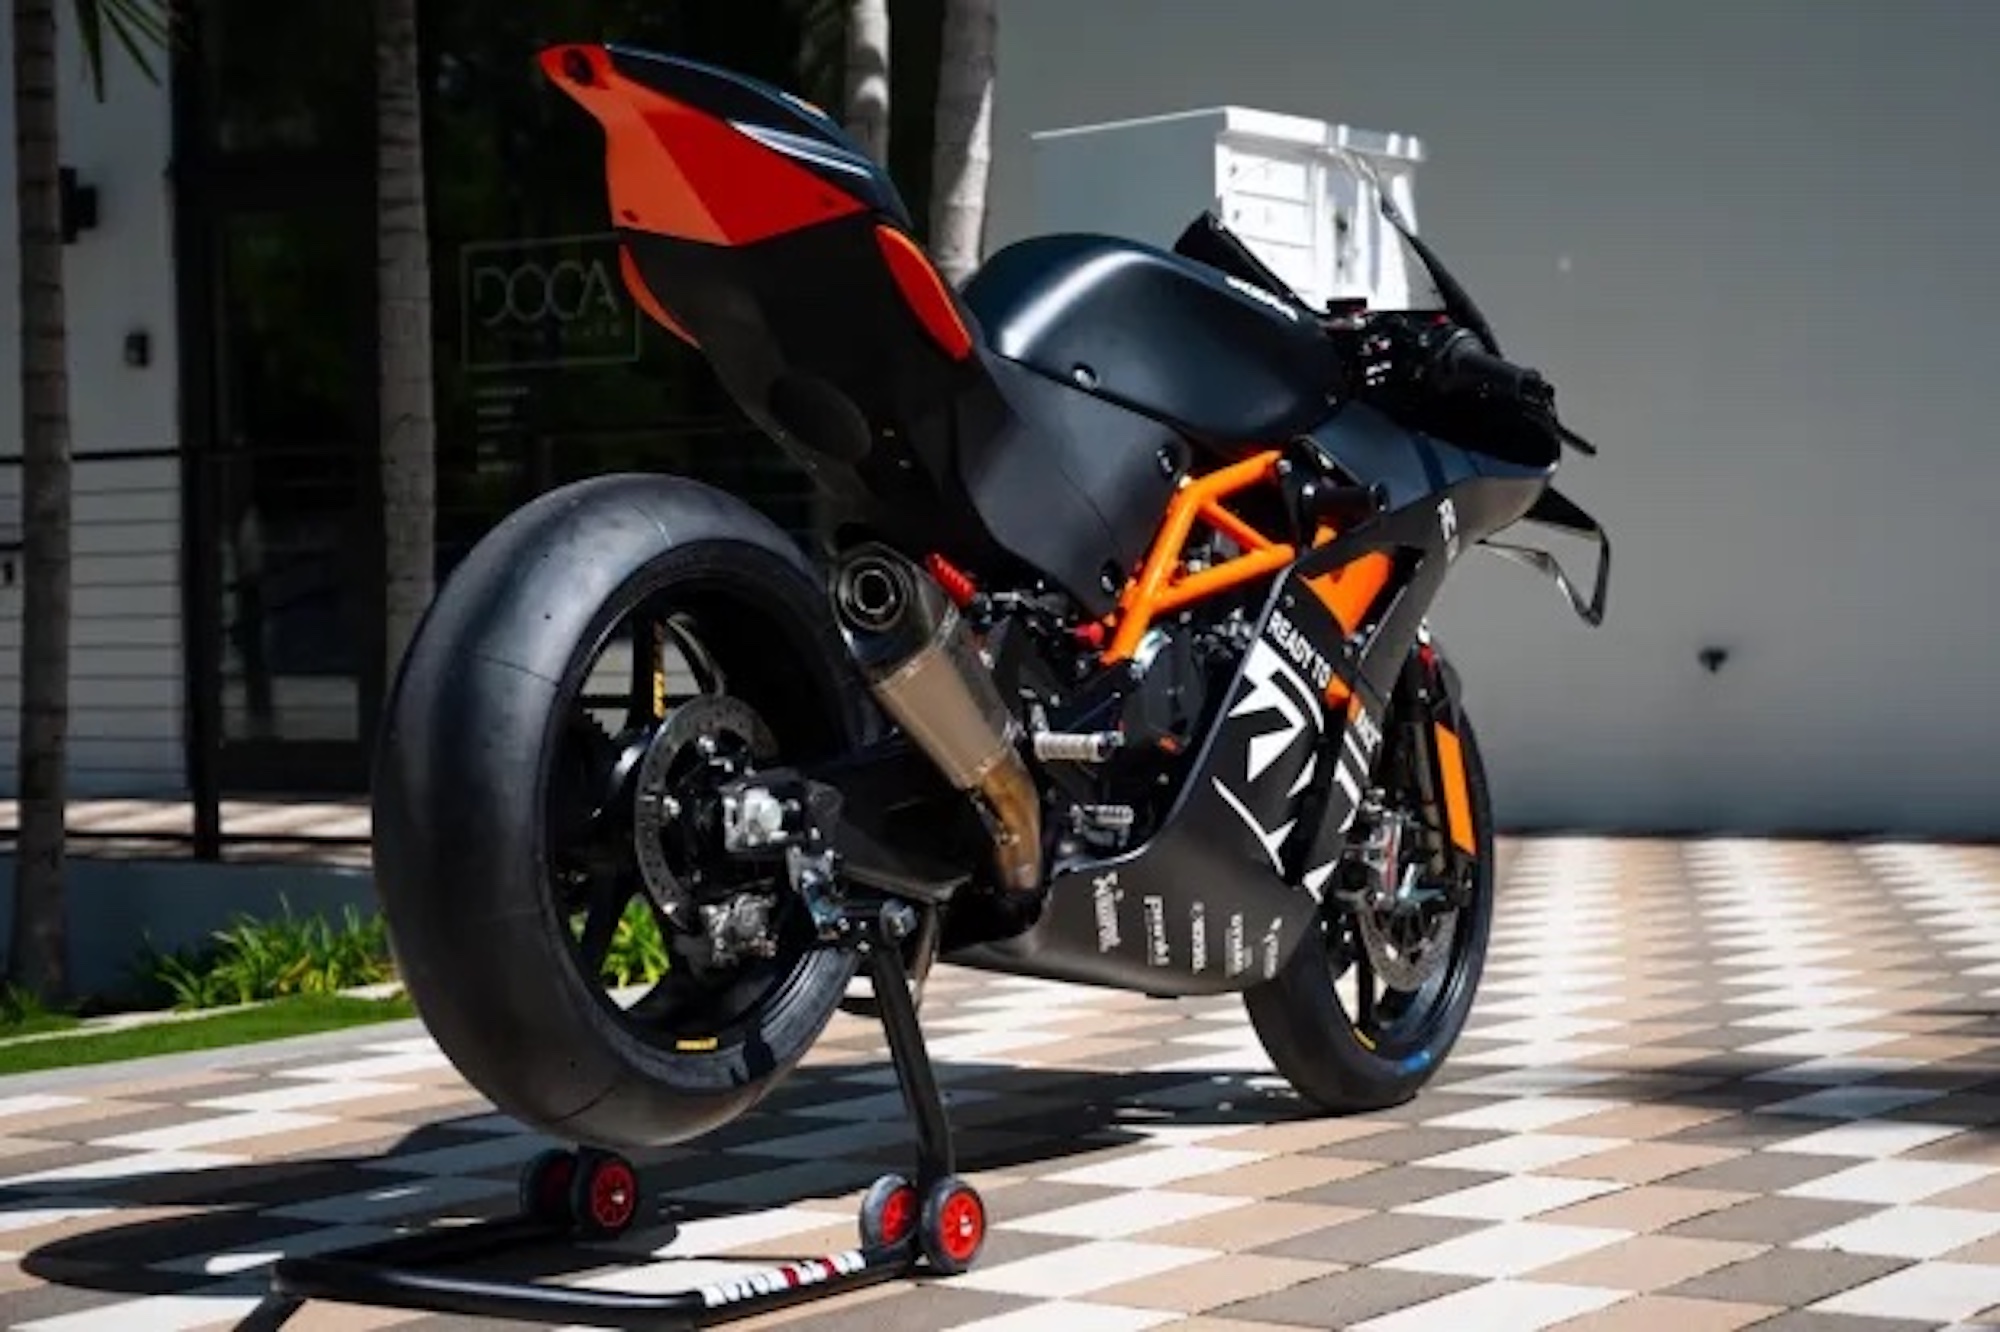 A view of the KTM RC 8C (#35 of 200) currently up for auction in Florida. Medias sourced from Bring a Trailer.